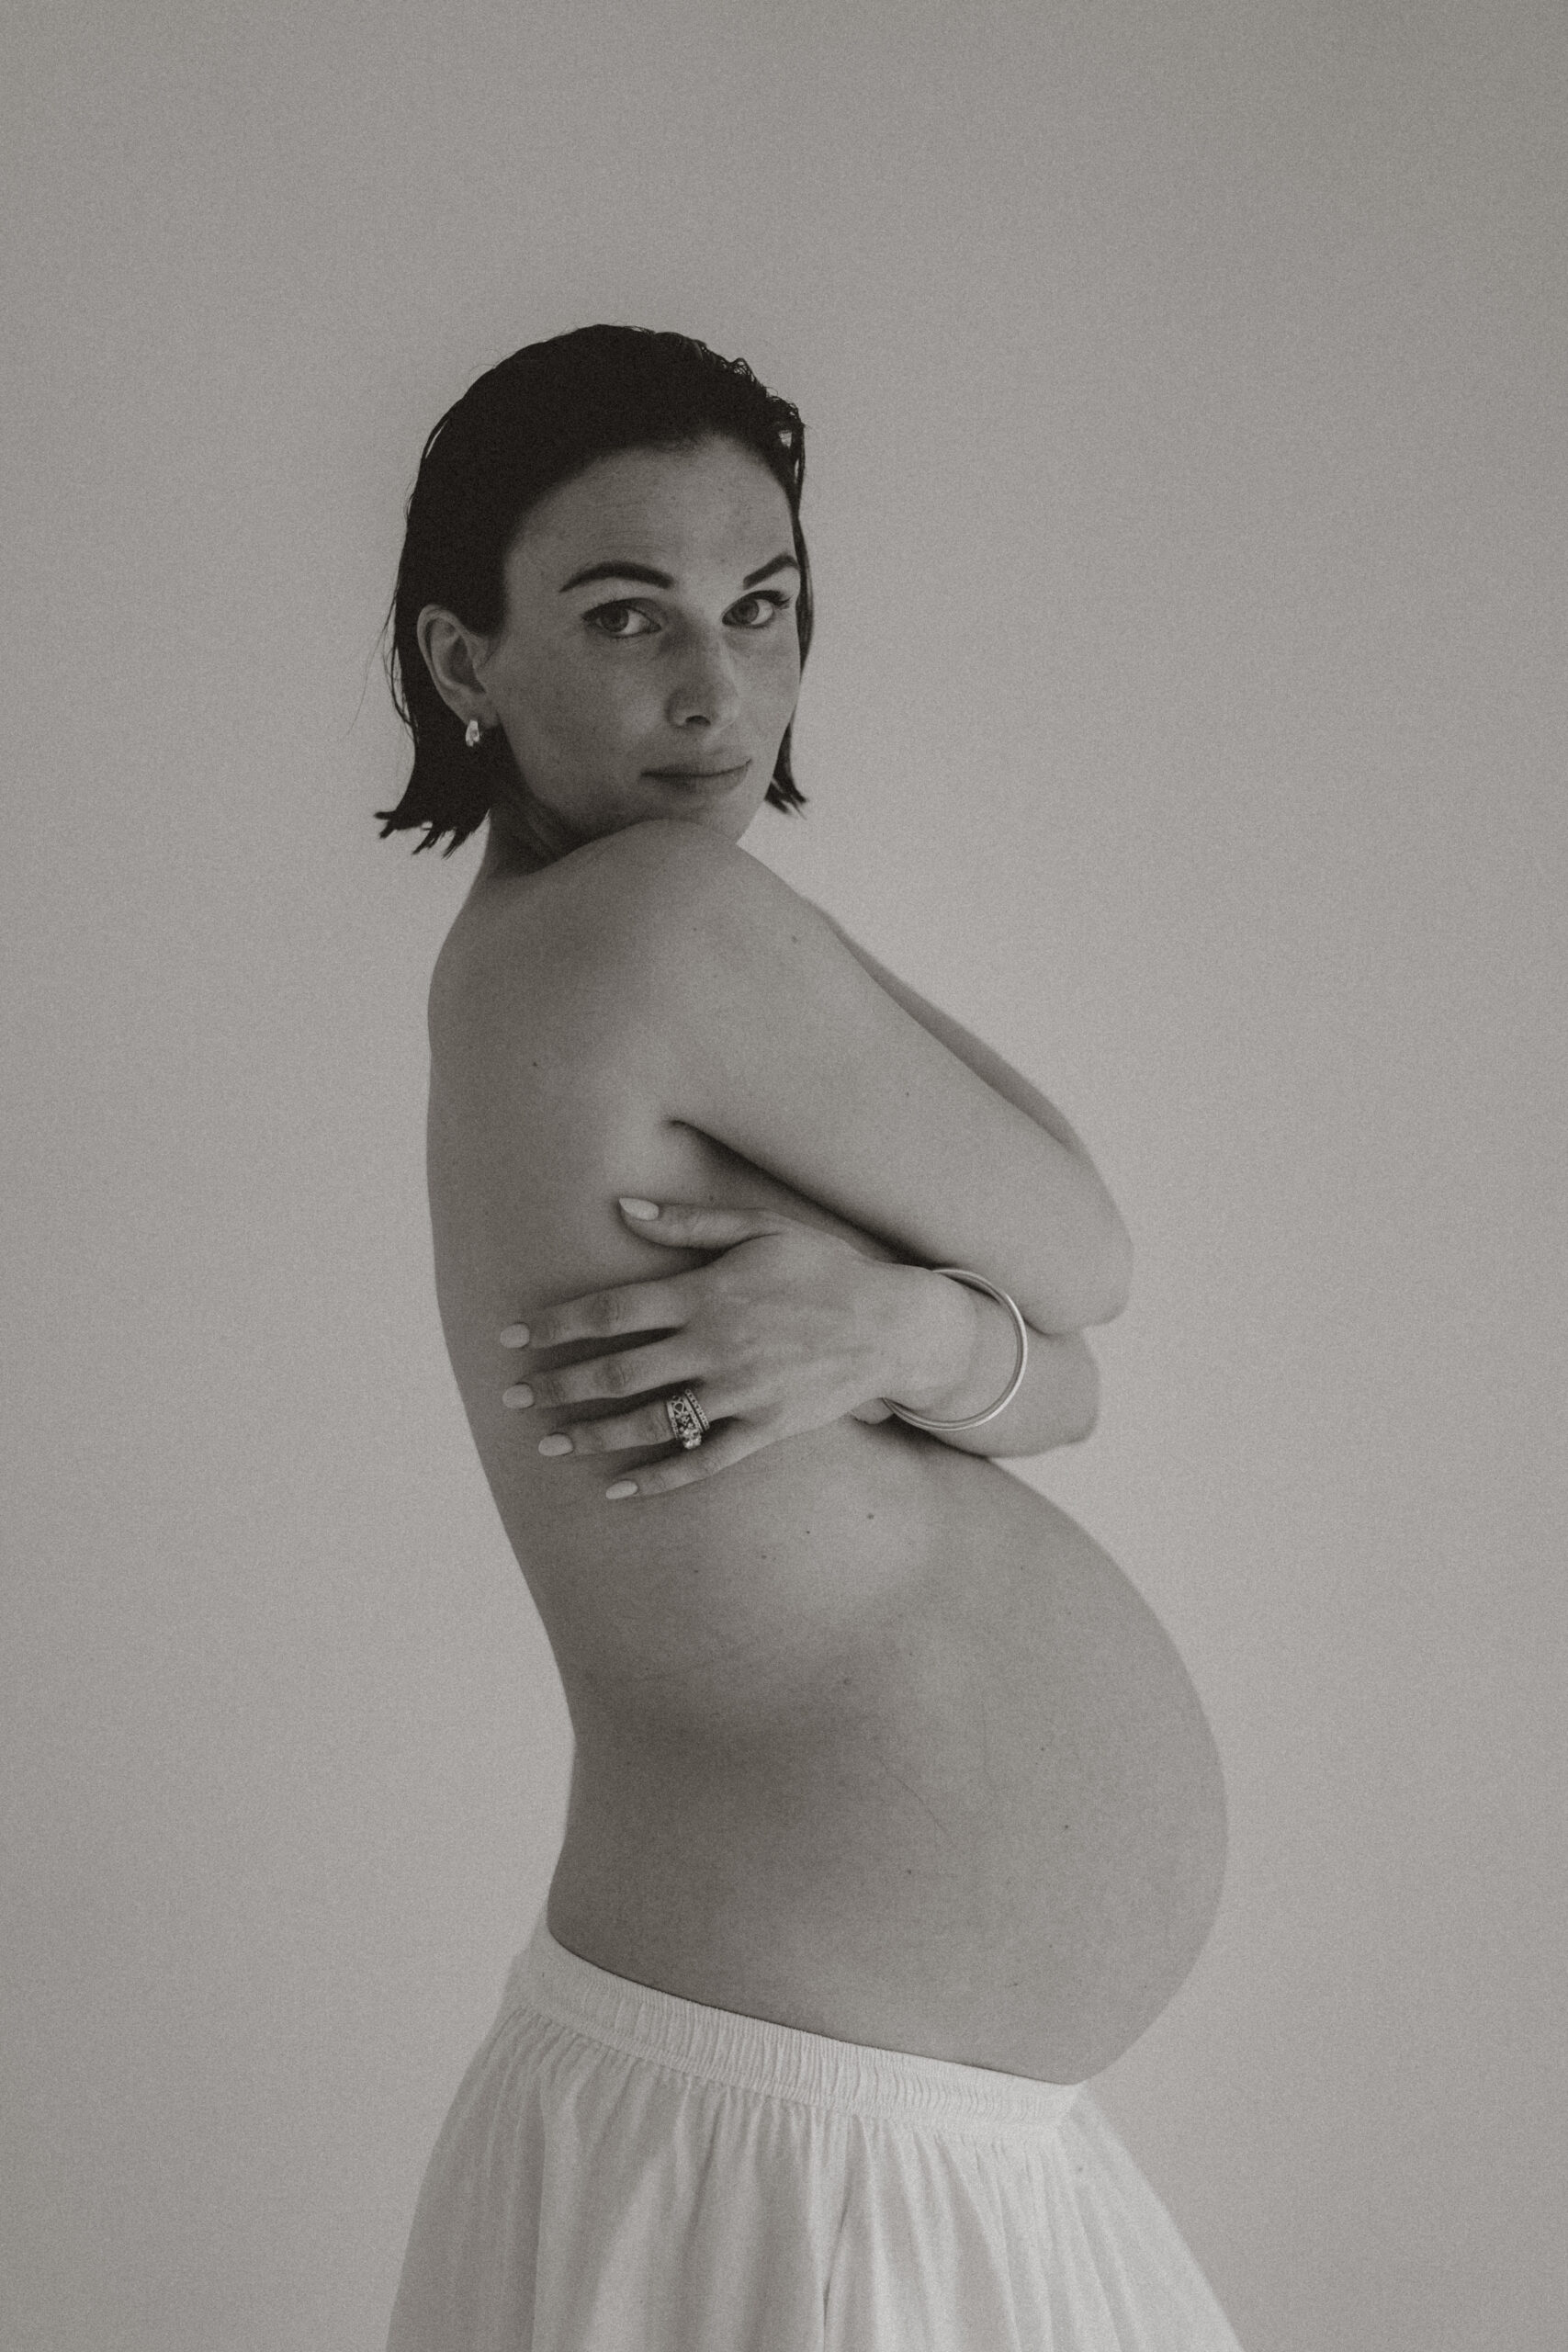 Black and white images of woman holding bump